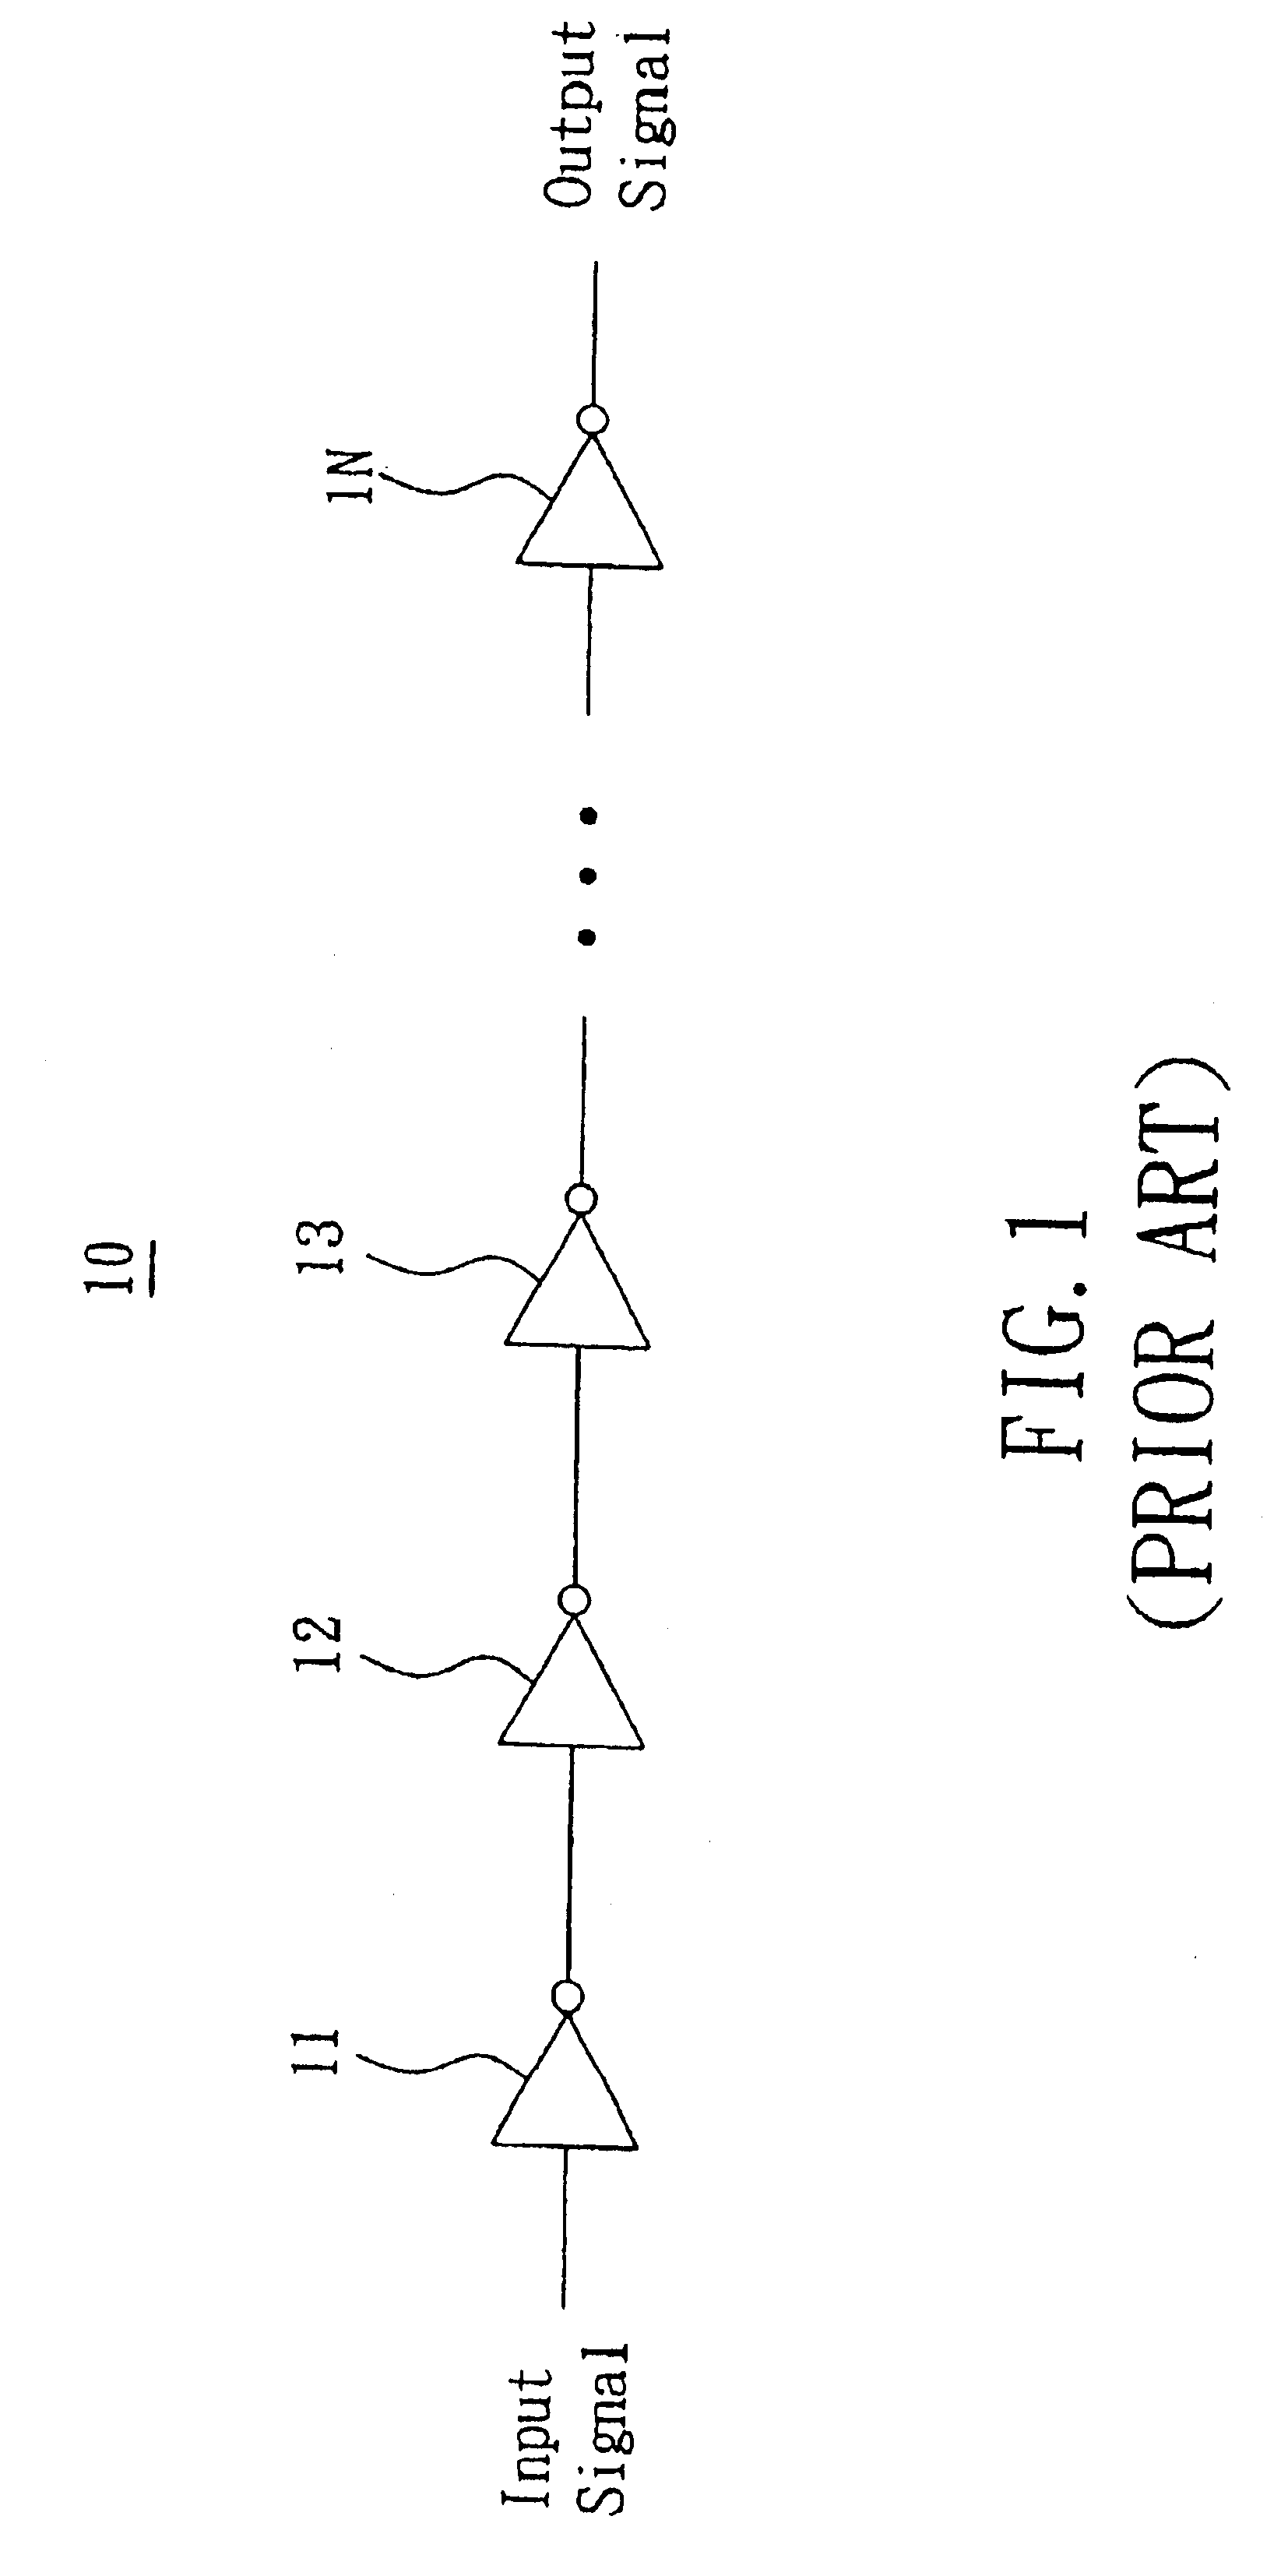 Output circuit for adjusting output voltage slew rate